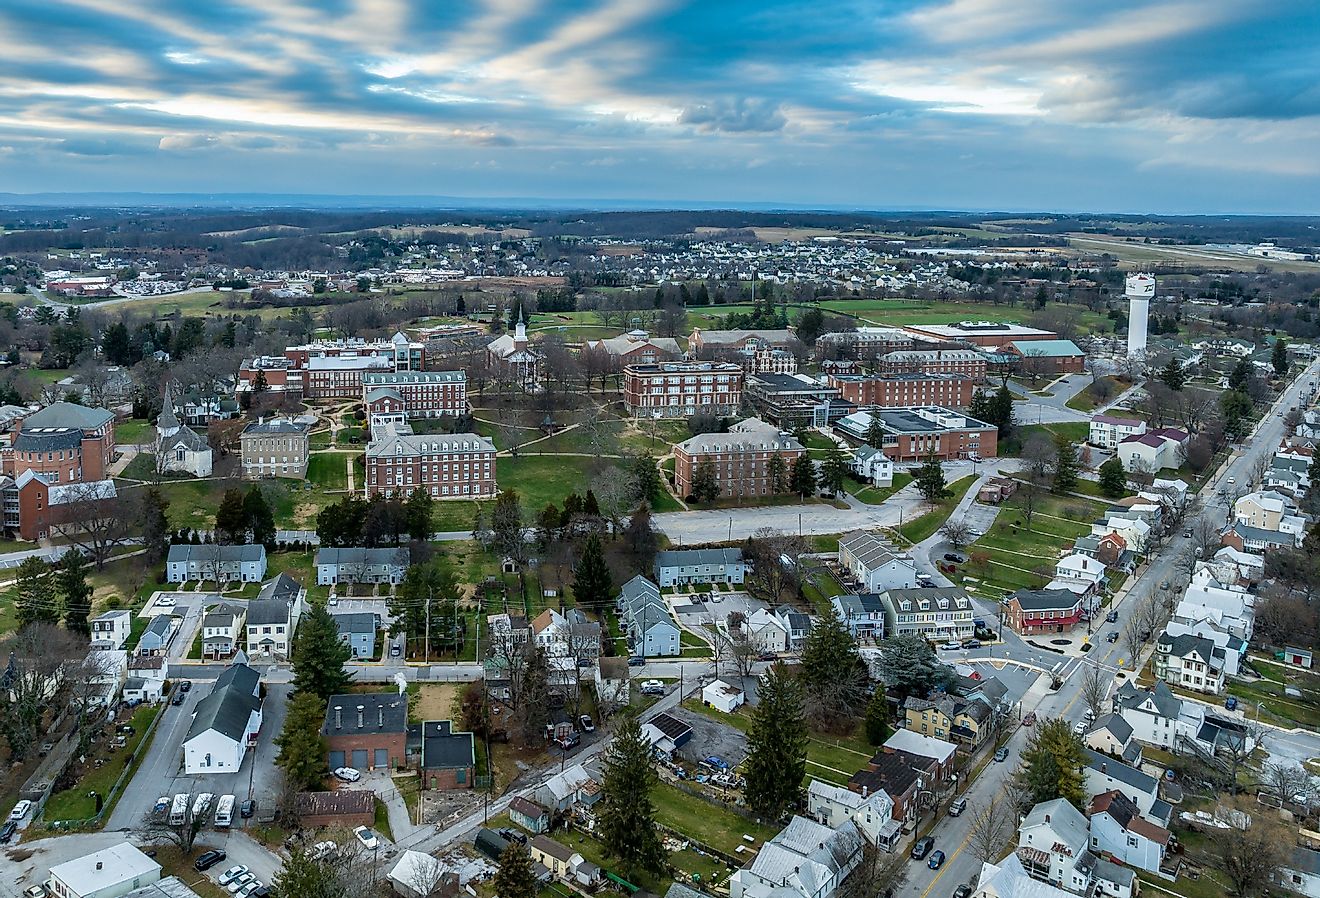 Westminster, Maryland, overlooking McDaniel College's private higher education institution.